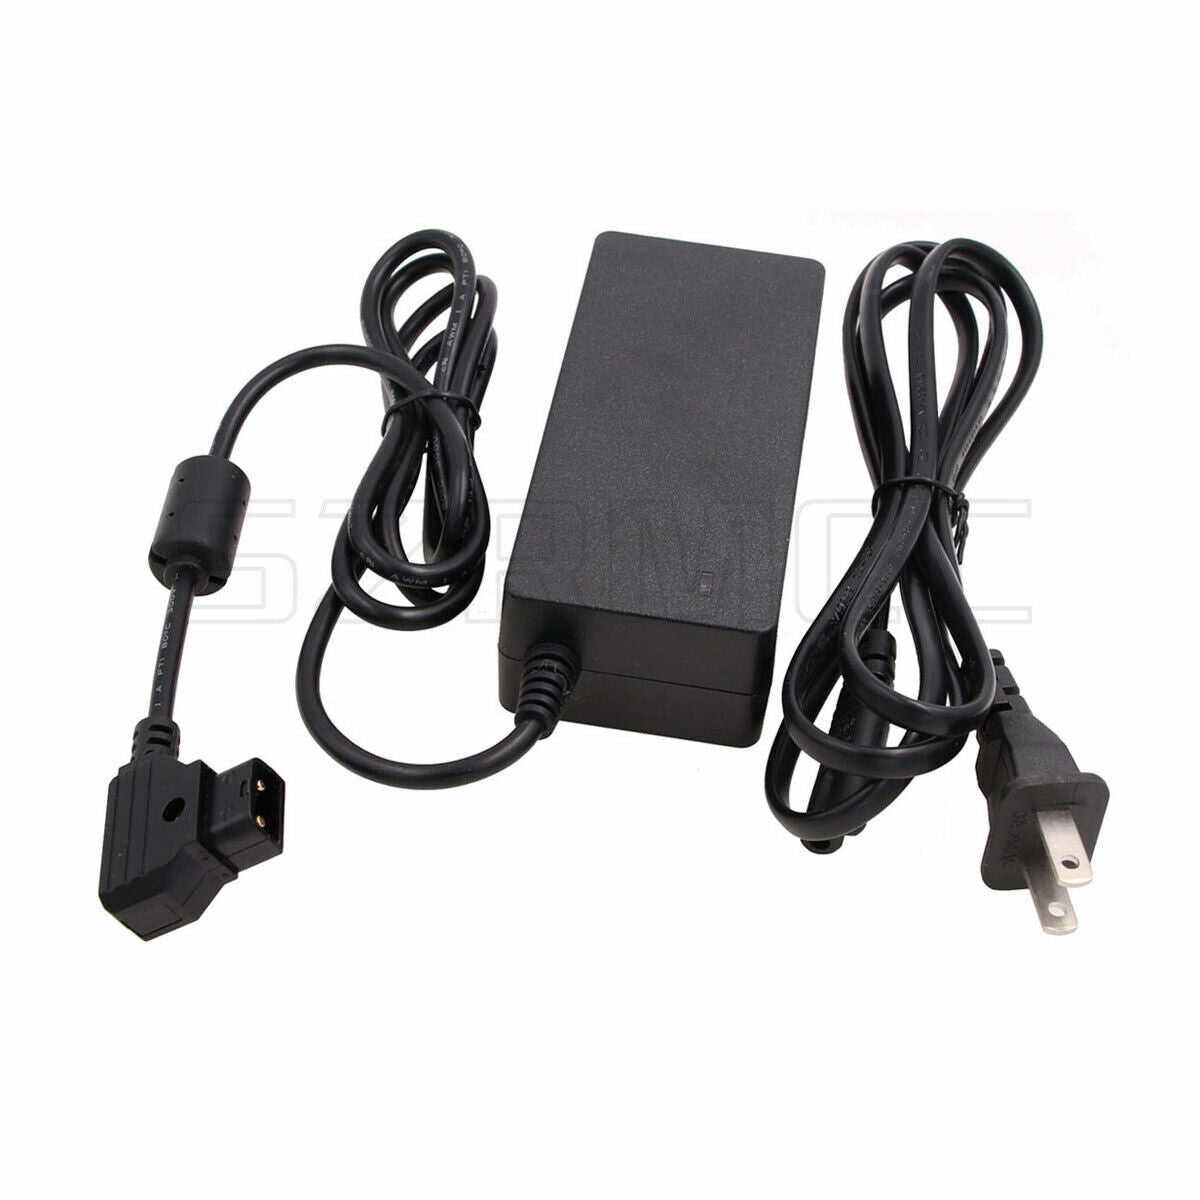 Farseeing FC-B4A Portable Charger 14.8v, 4a